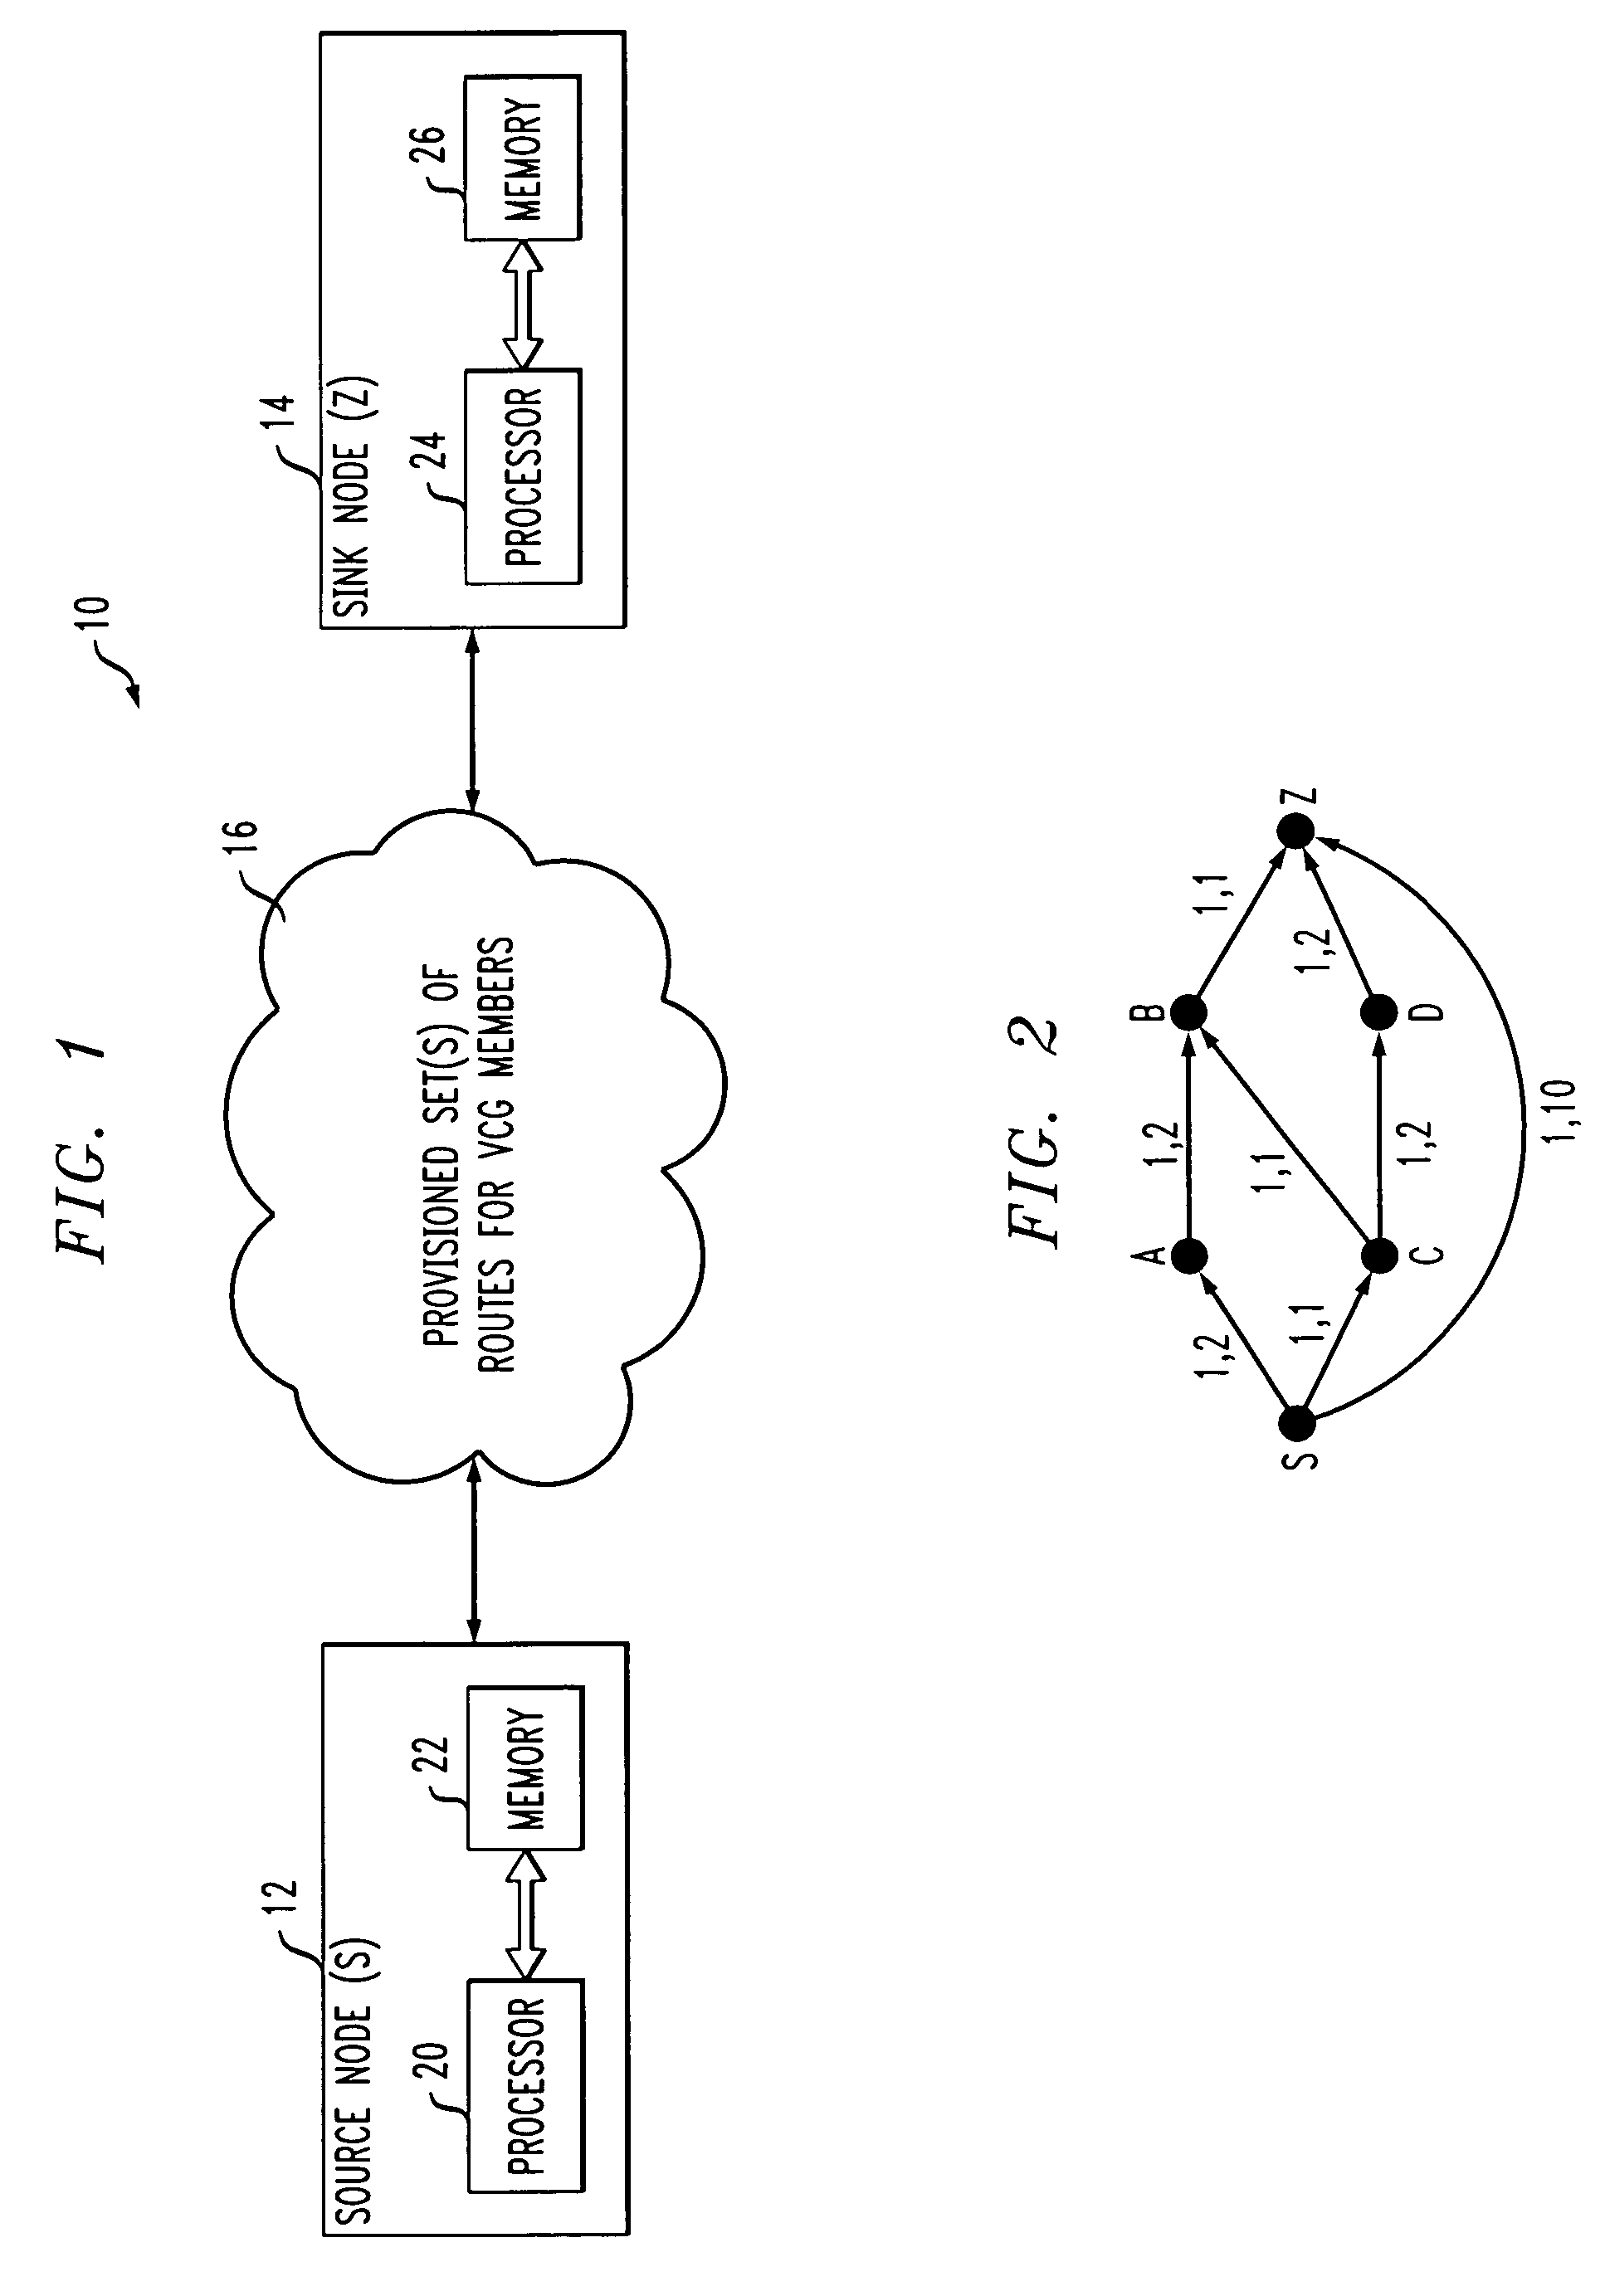 Differential delay constrained routing for virtually-concatenated data traffic